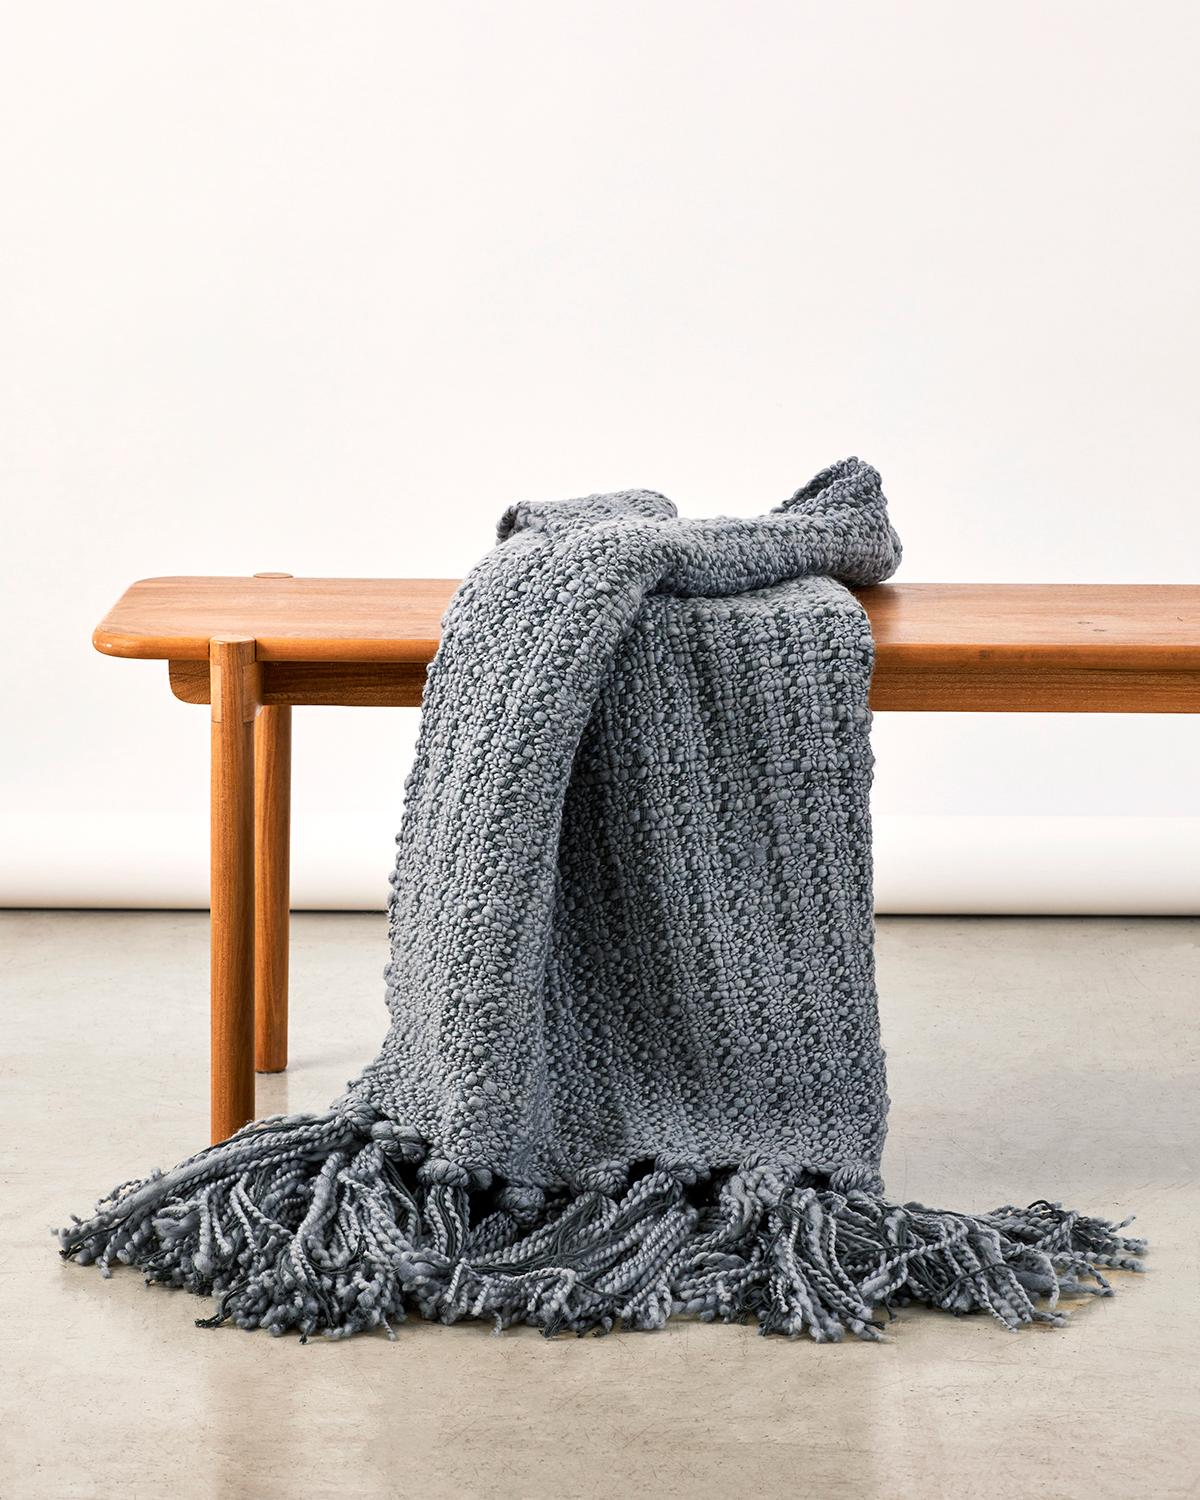 An ultra soft cotton throw to cozy up with on cold winter nights. Indulge in the quiet luxury of our Mar Merino Wool and Cotton Throw Blanket. Handwoven from a blend of merino wool and cotton, this throw boasts a rustic yet modern design with a soft